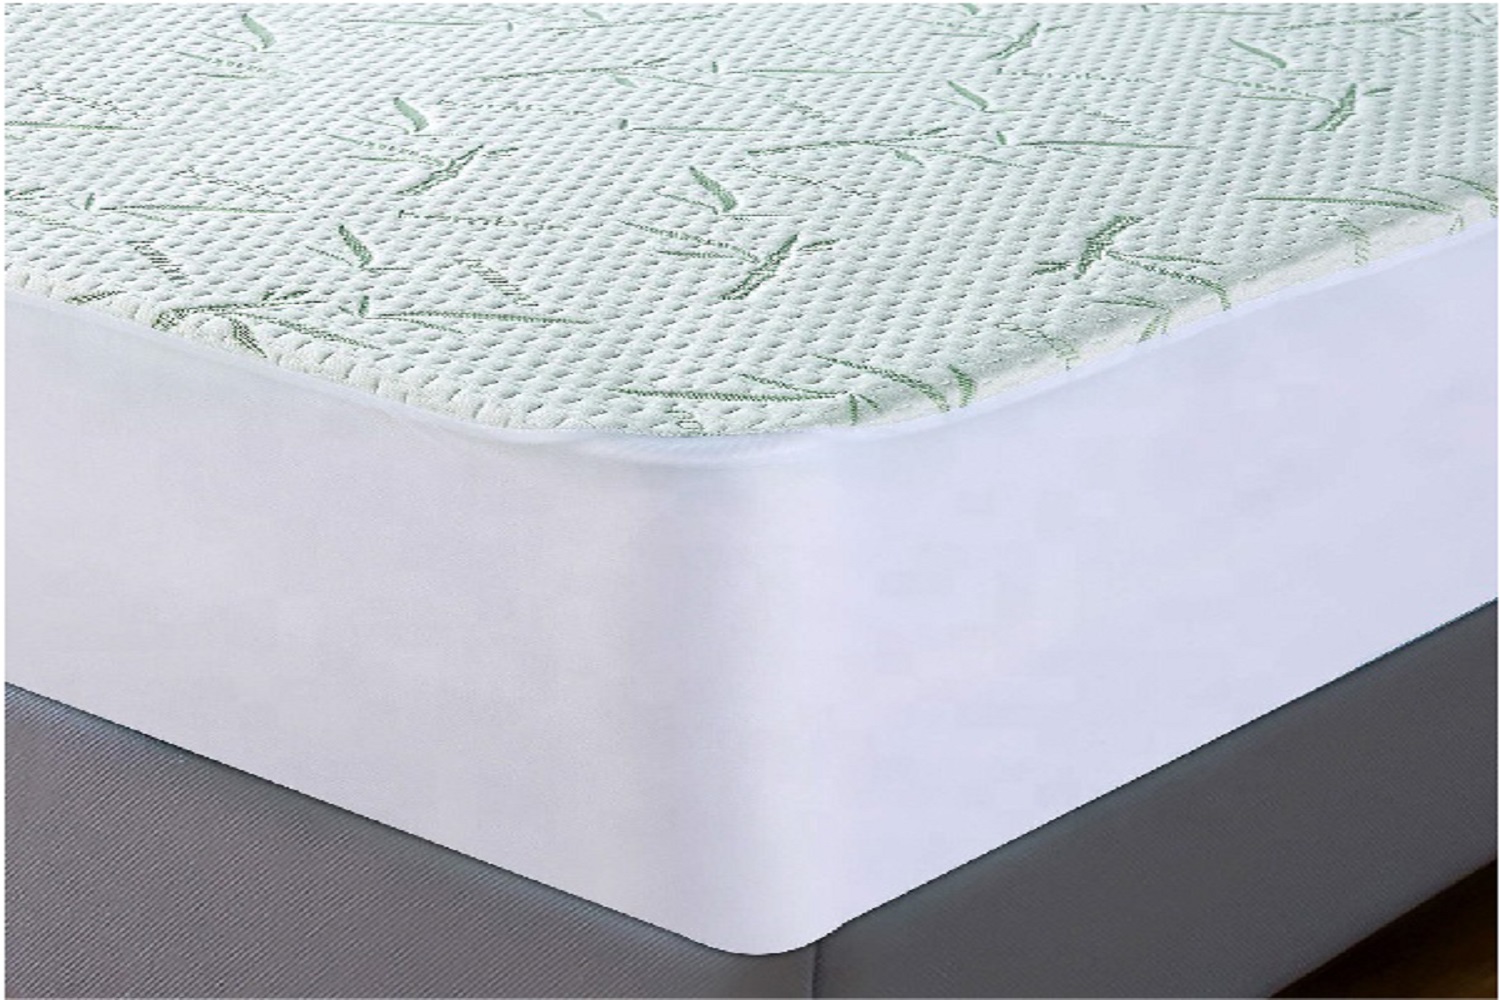 Waterproof Mattress Bamboo Hypoallergenic Deep Pocket Protector Cover Twin Size 